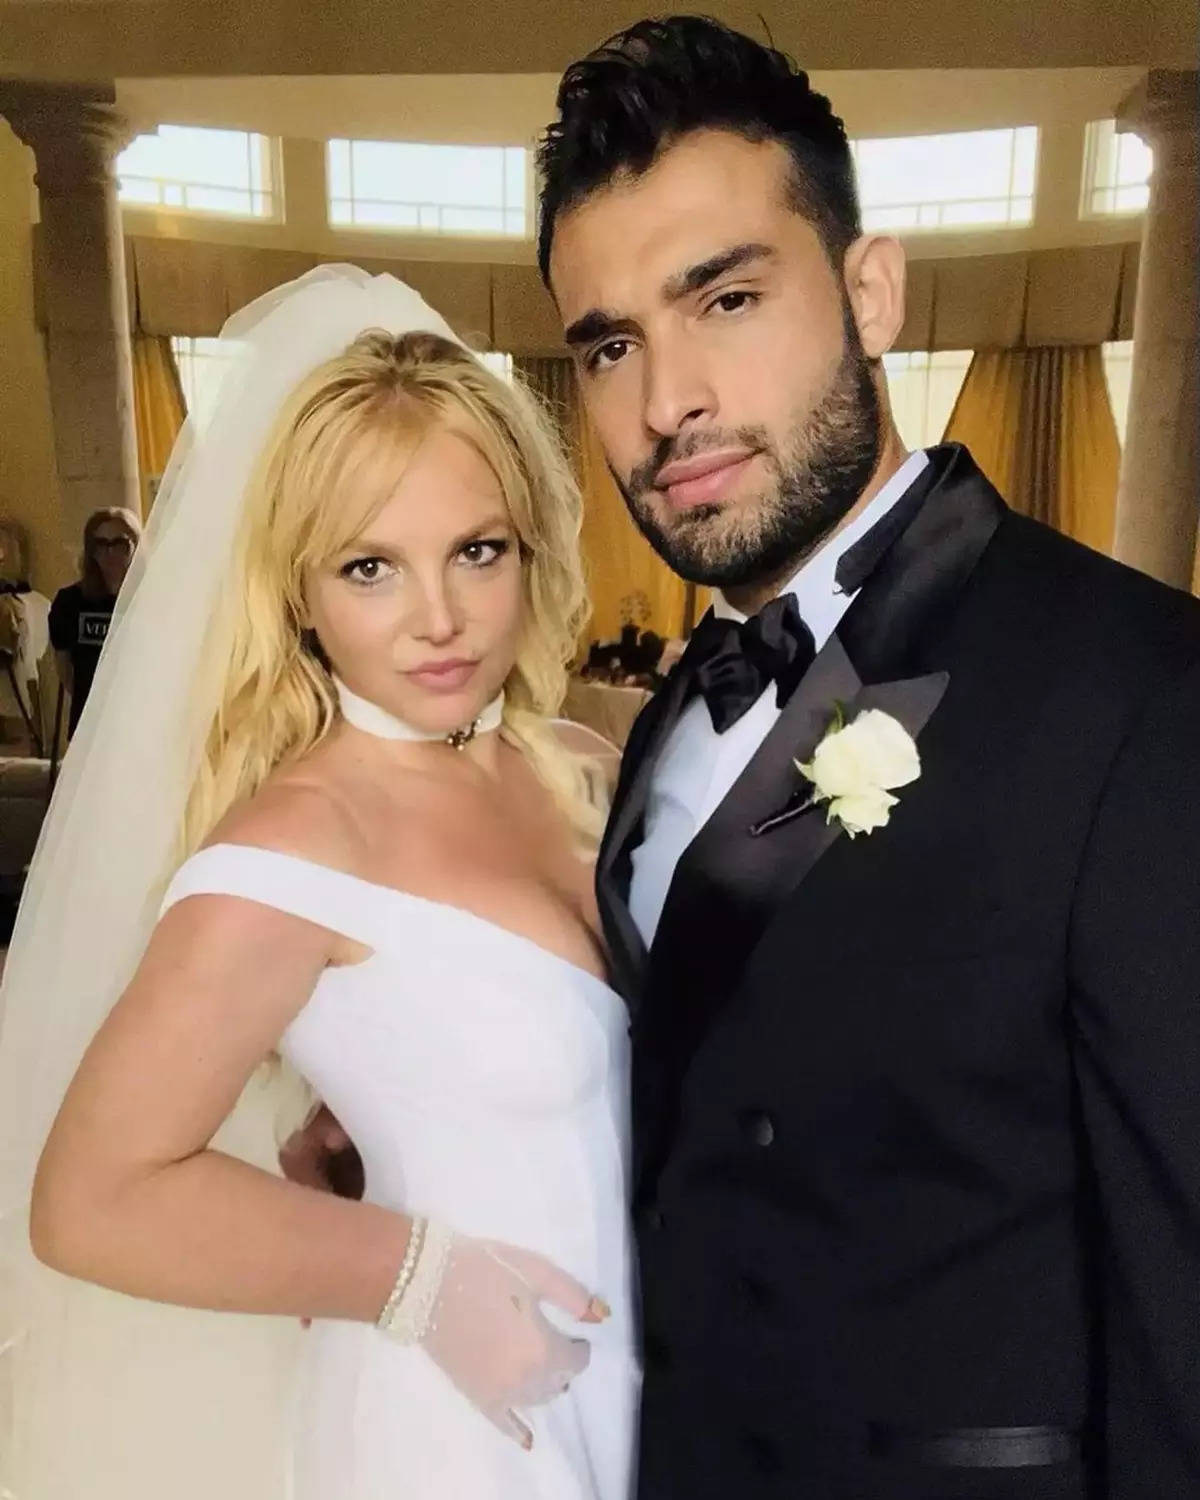 Inside Britney Spears and Sam Asghari's wedding at home in LA